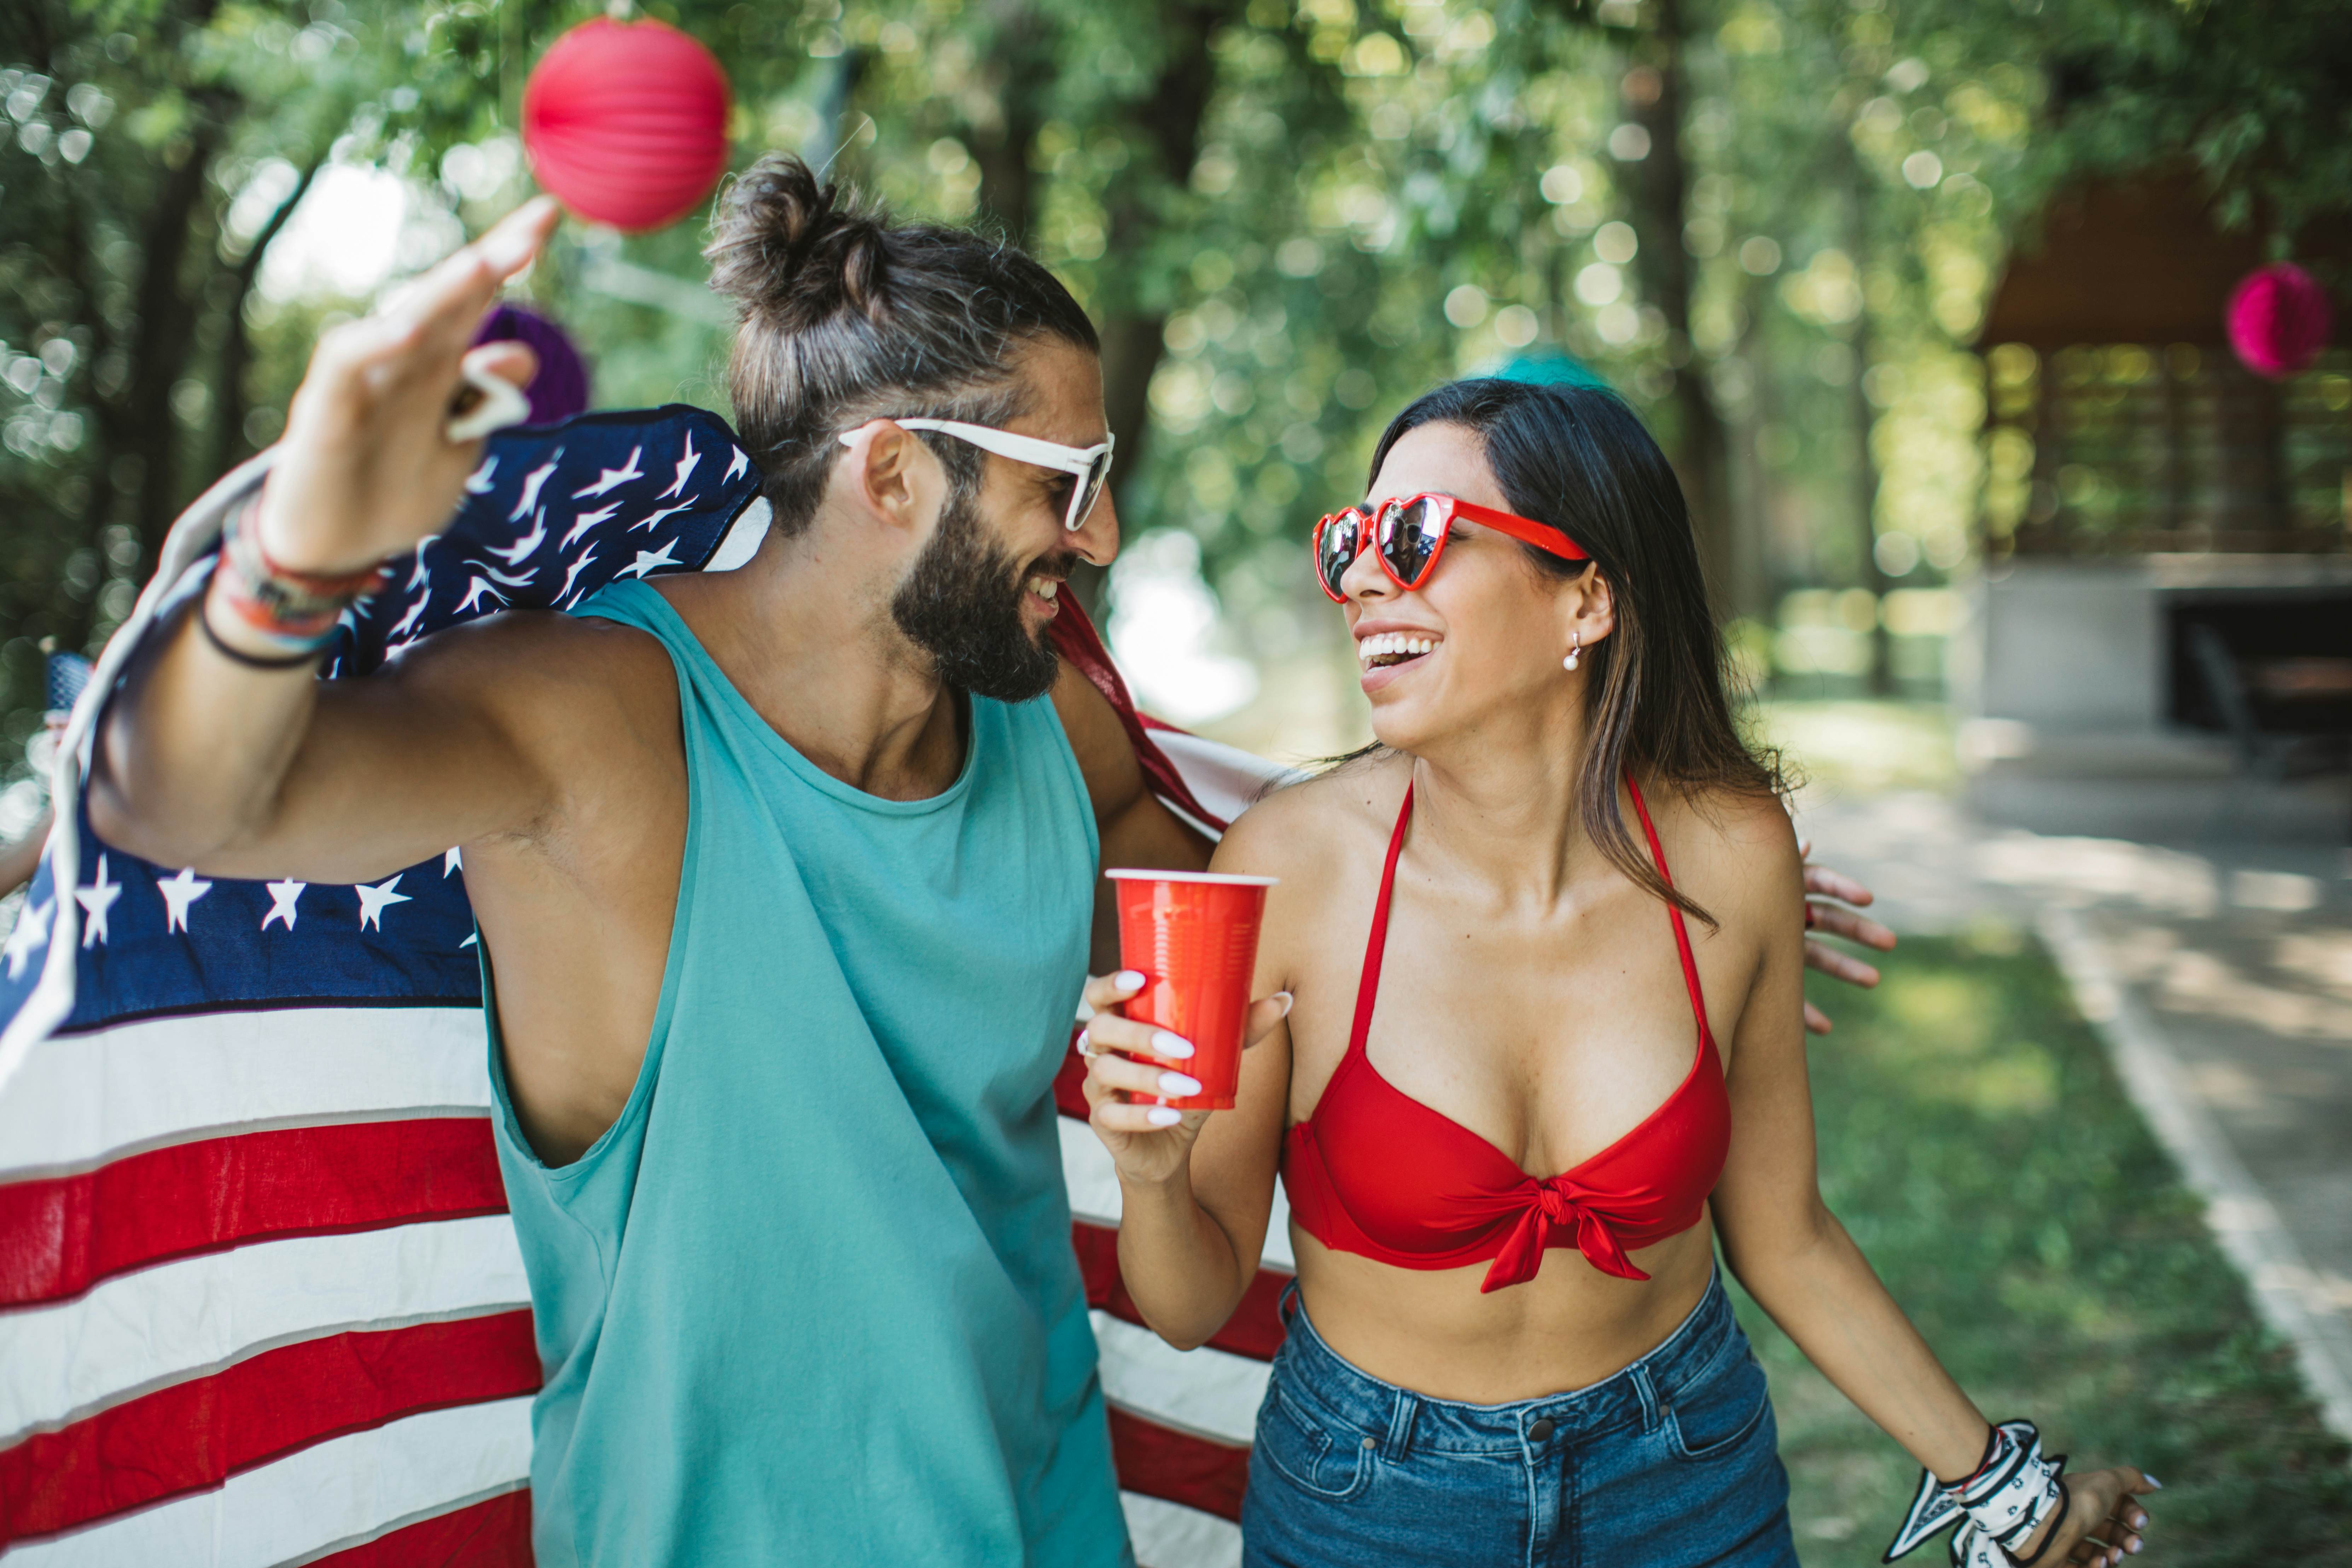 Finding fun on the Fourth of July